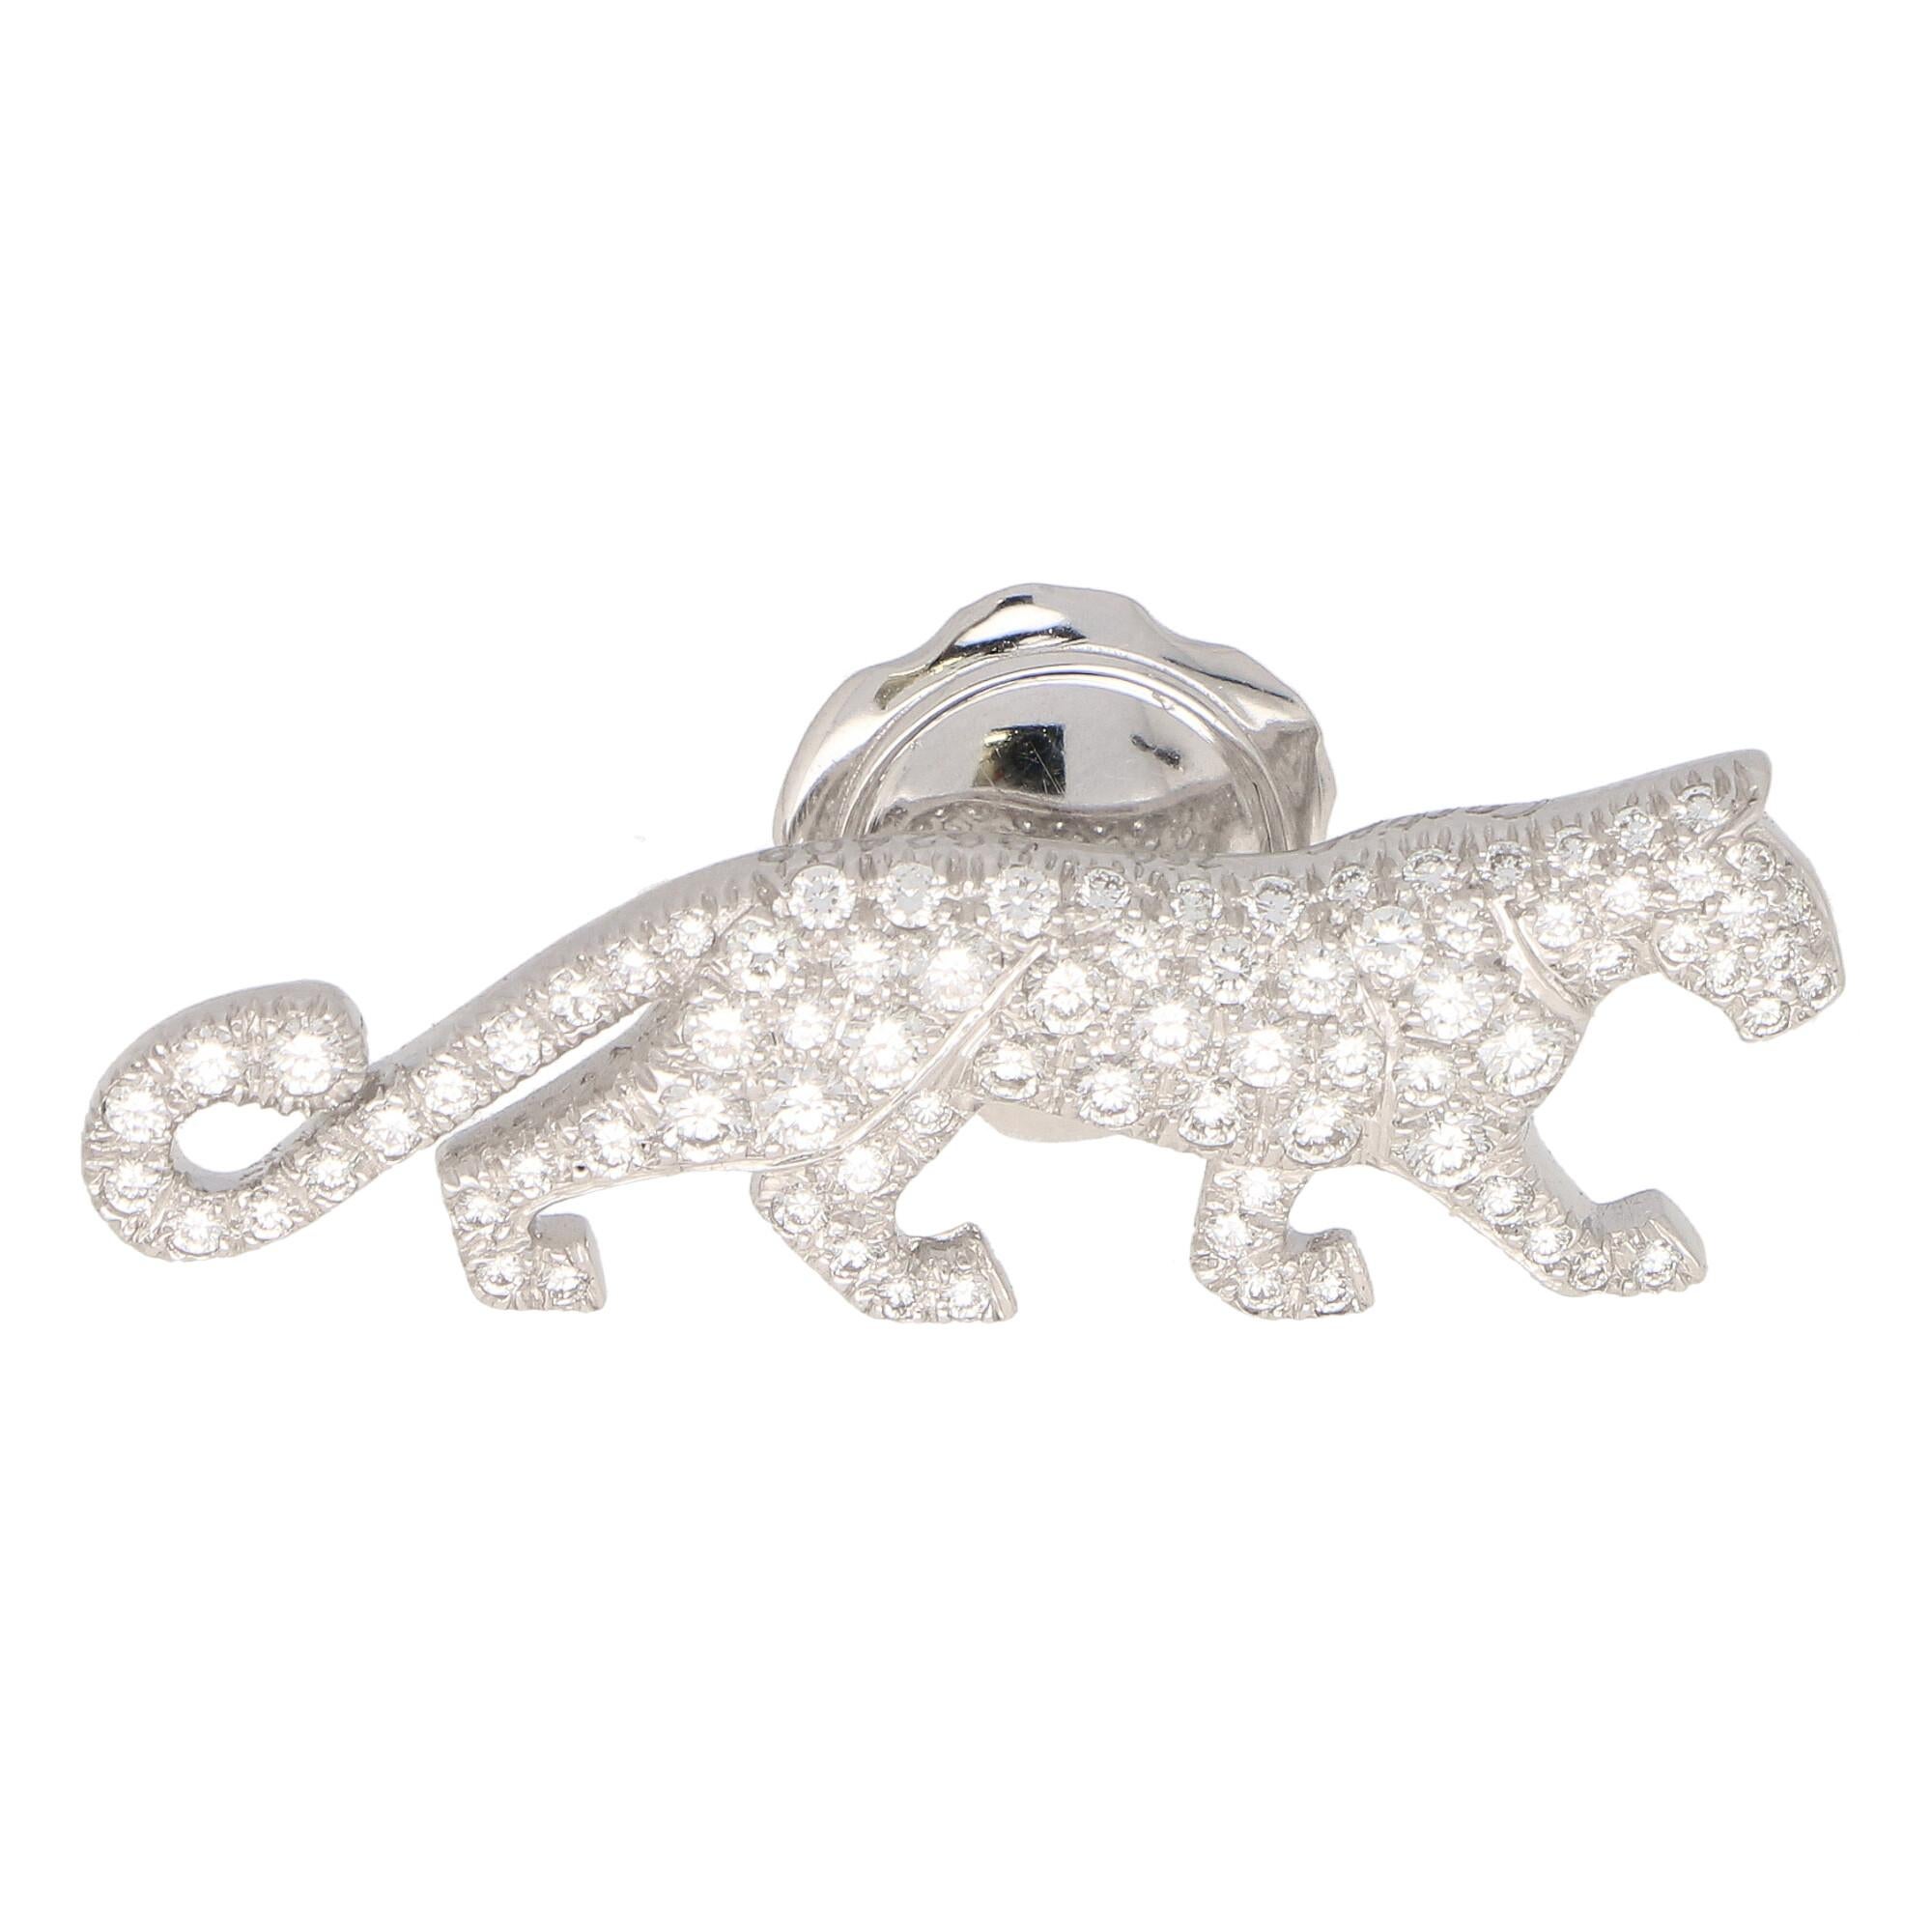 Rare Vintage Cartier Diamond Panther Pin Brooch in 18k White Gold 1